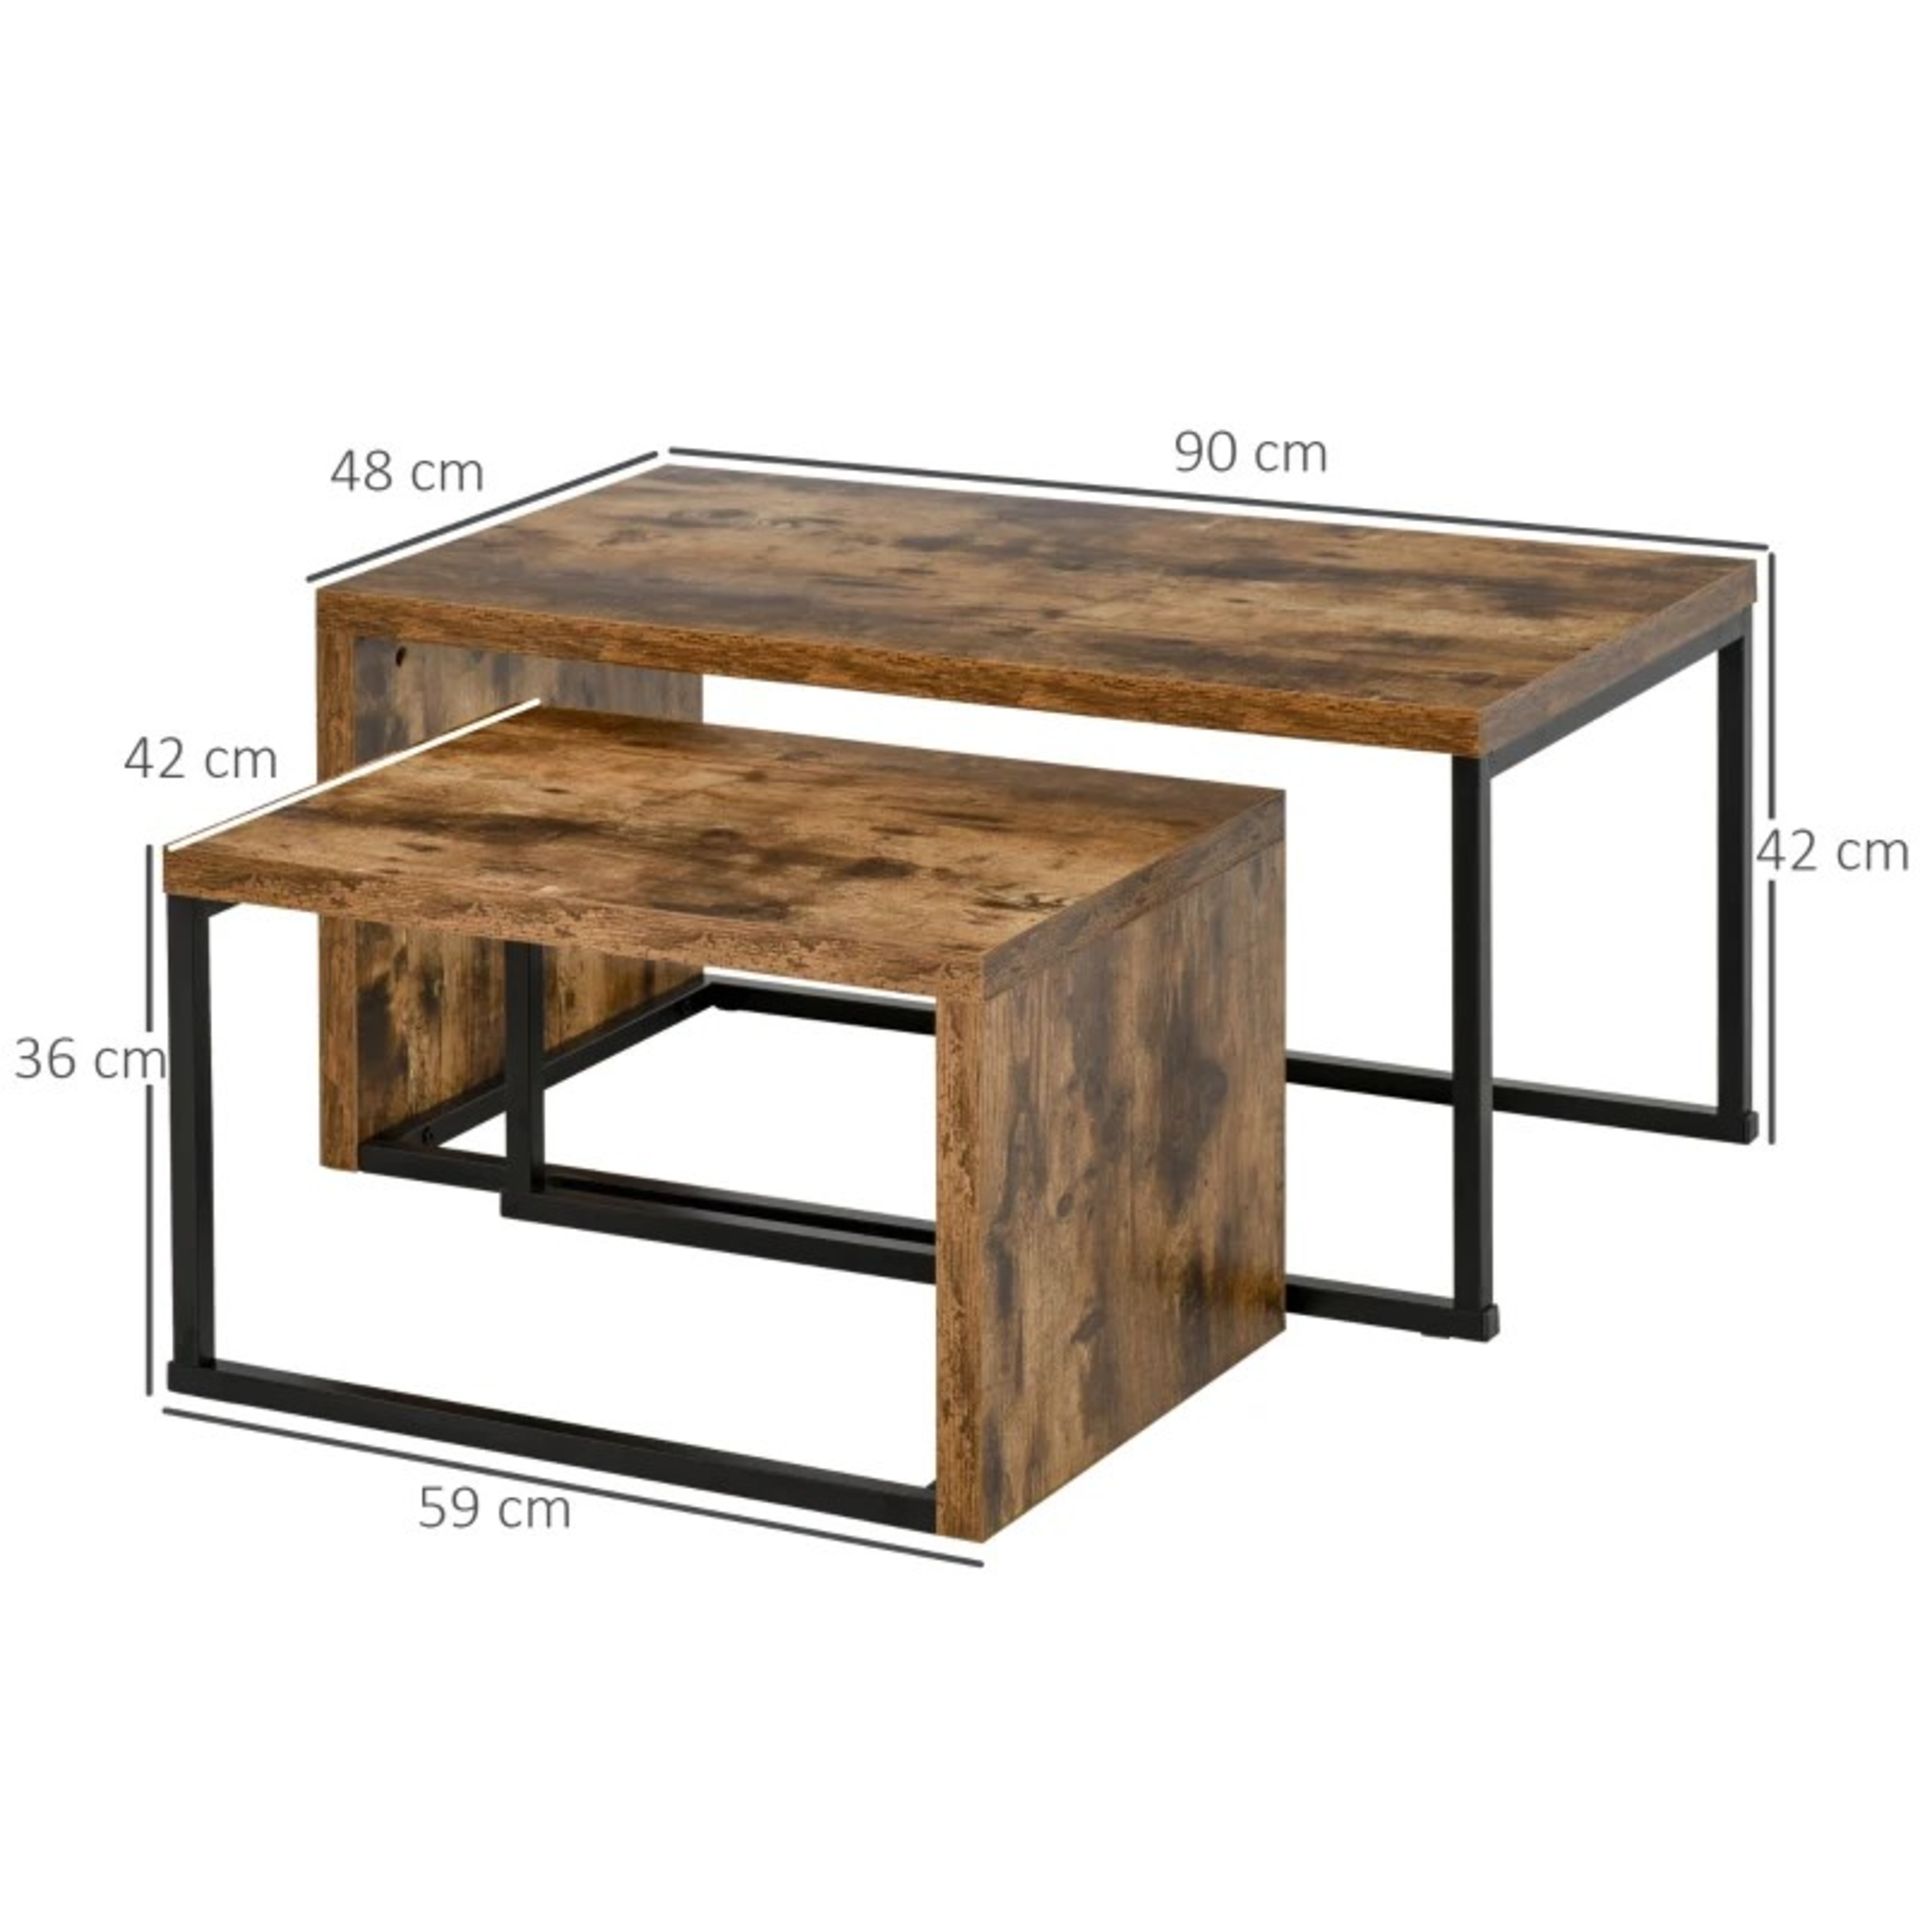 RRP £84.99 - HOMCOM 2 Pieces Coffee Tables Set Industrial Style Side Table Living Room Bedroom - Image 2 of 4